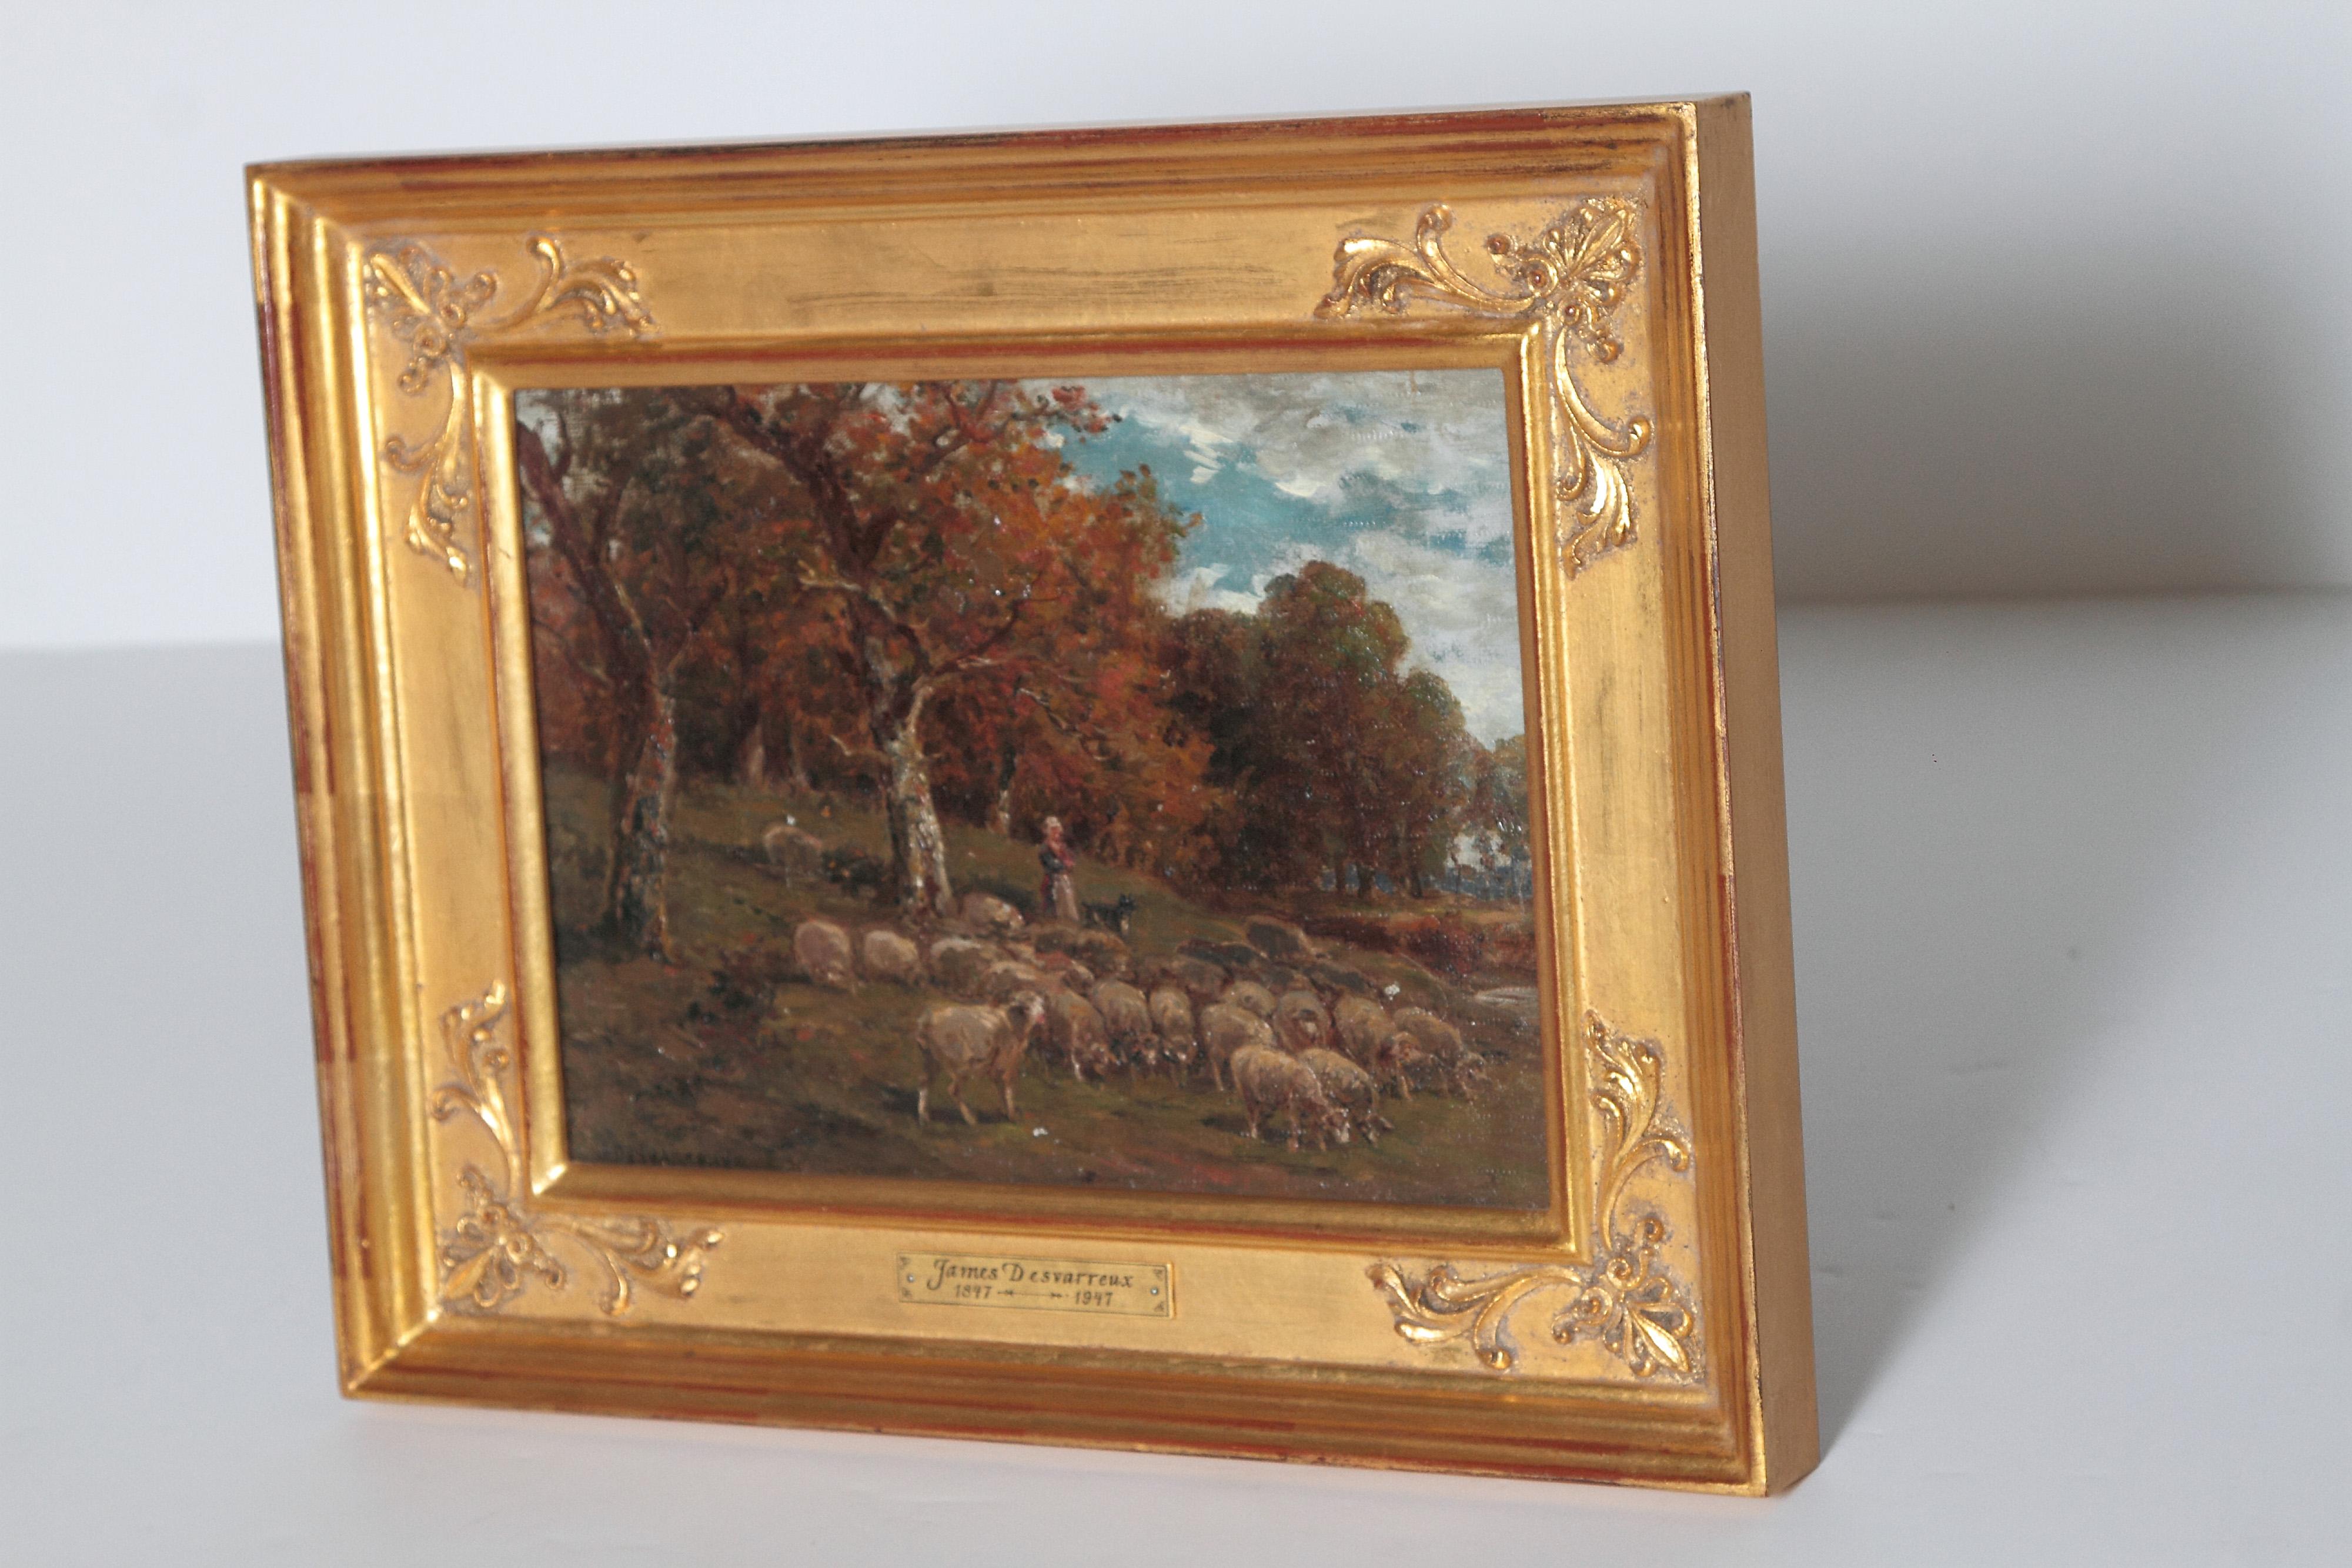 19th century oil on canvas by James Desvarreux-Larpenteur (1847-1937, American). Depicting a Shepherdess and her sheep dog tending a flock of sheep near a Stand of trees on a sunny day. Signed J Desvarruex lower left. He studied in Paris at the